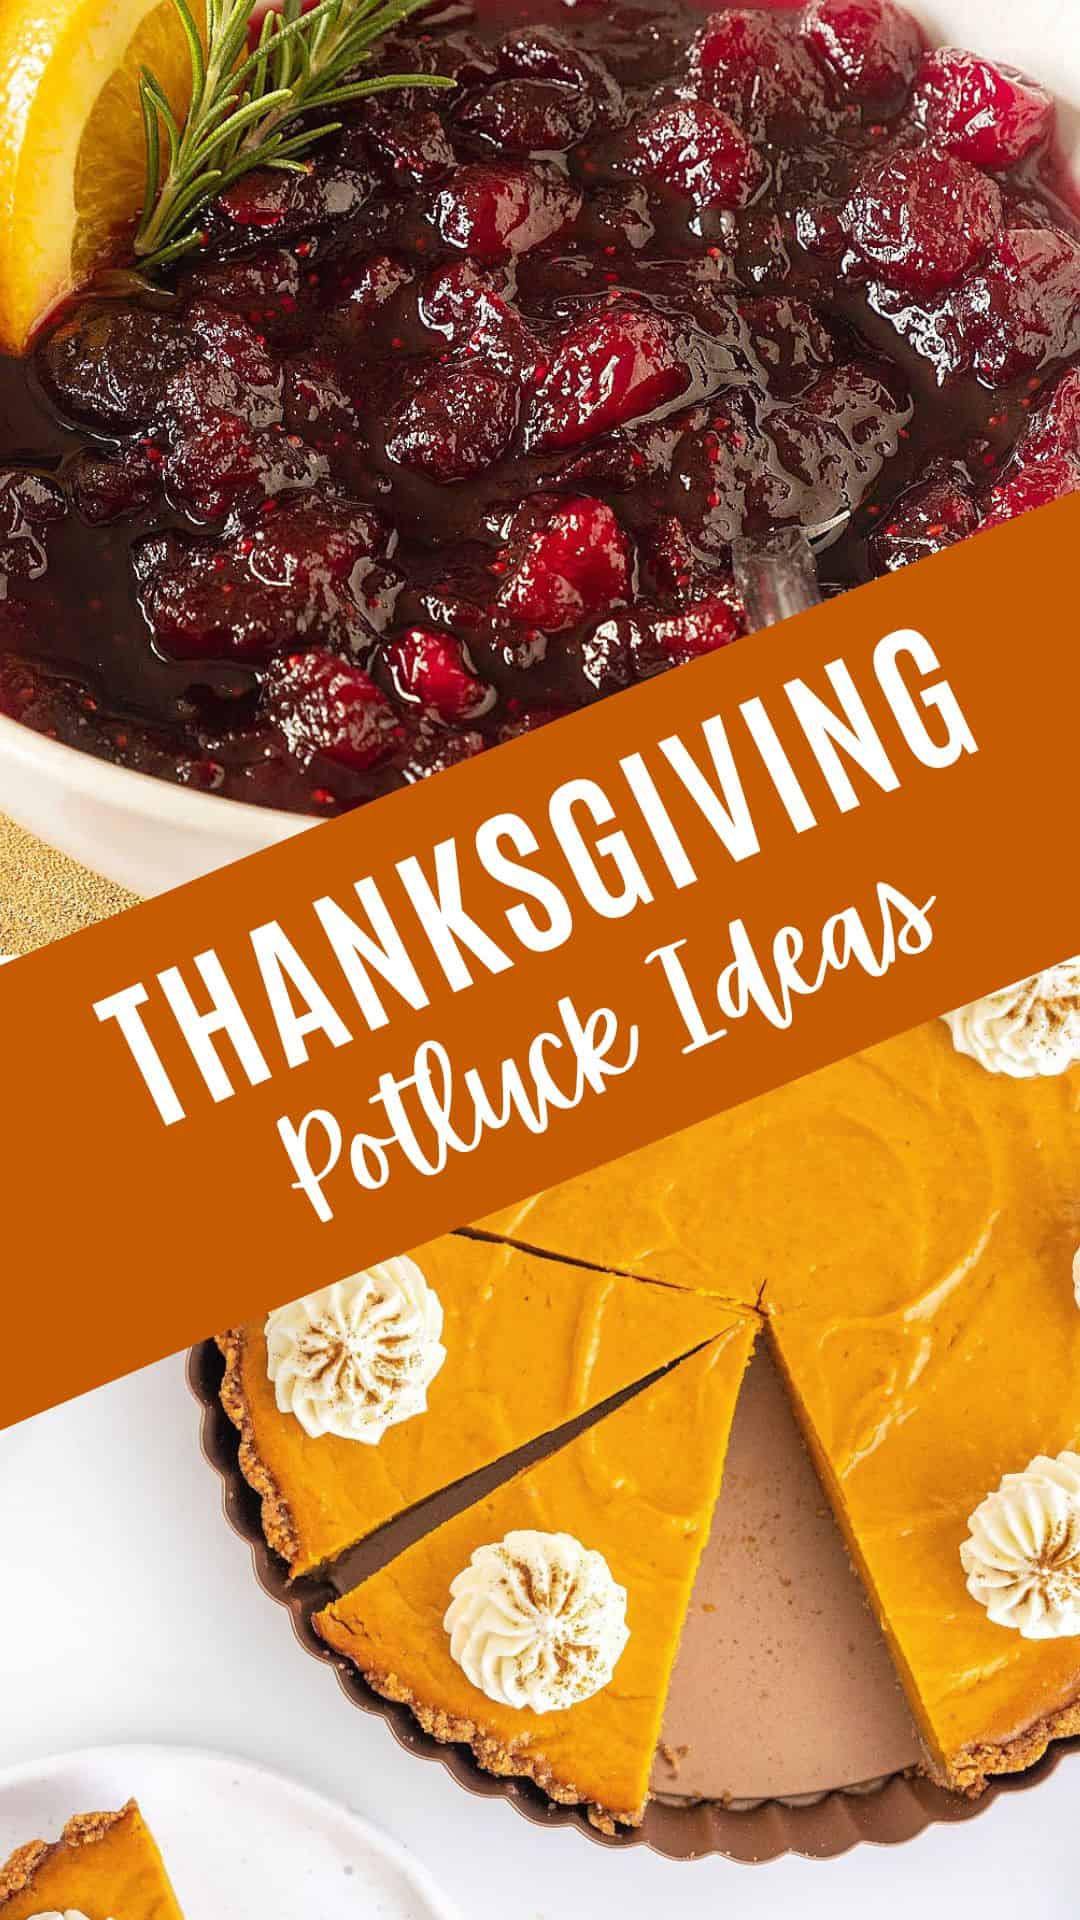 Brown and white text overlay on two images of cranberry sauce and sweet potato pie.